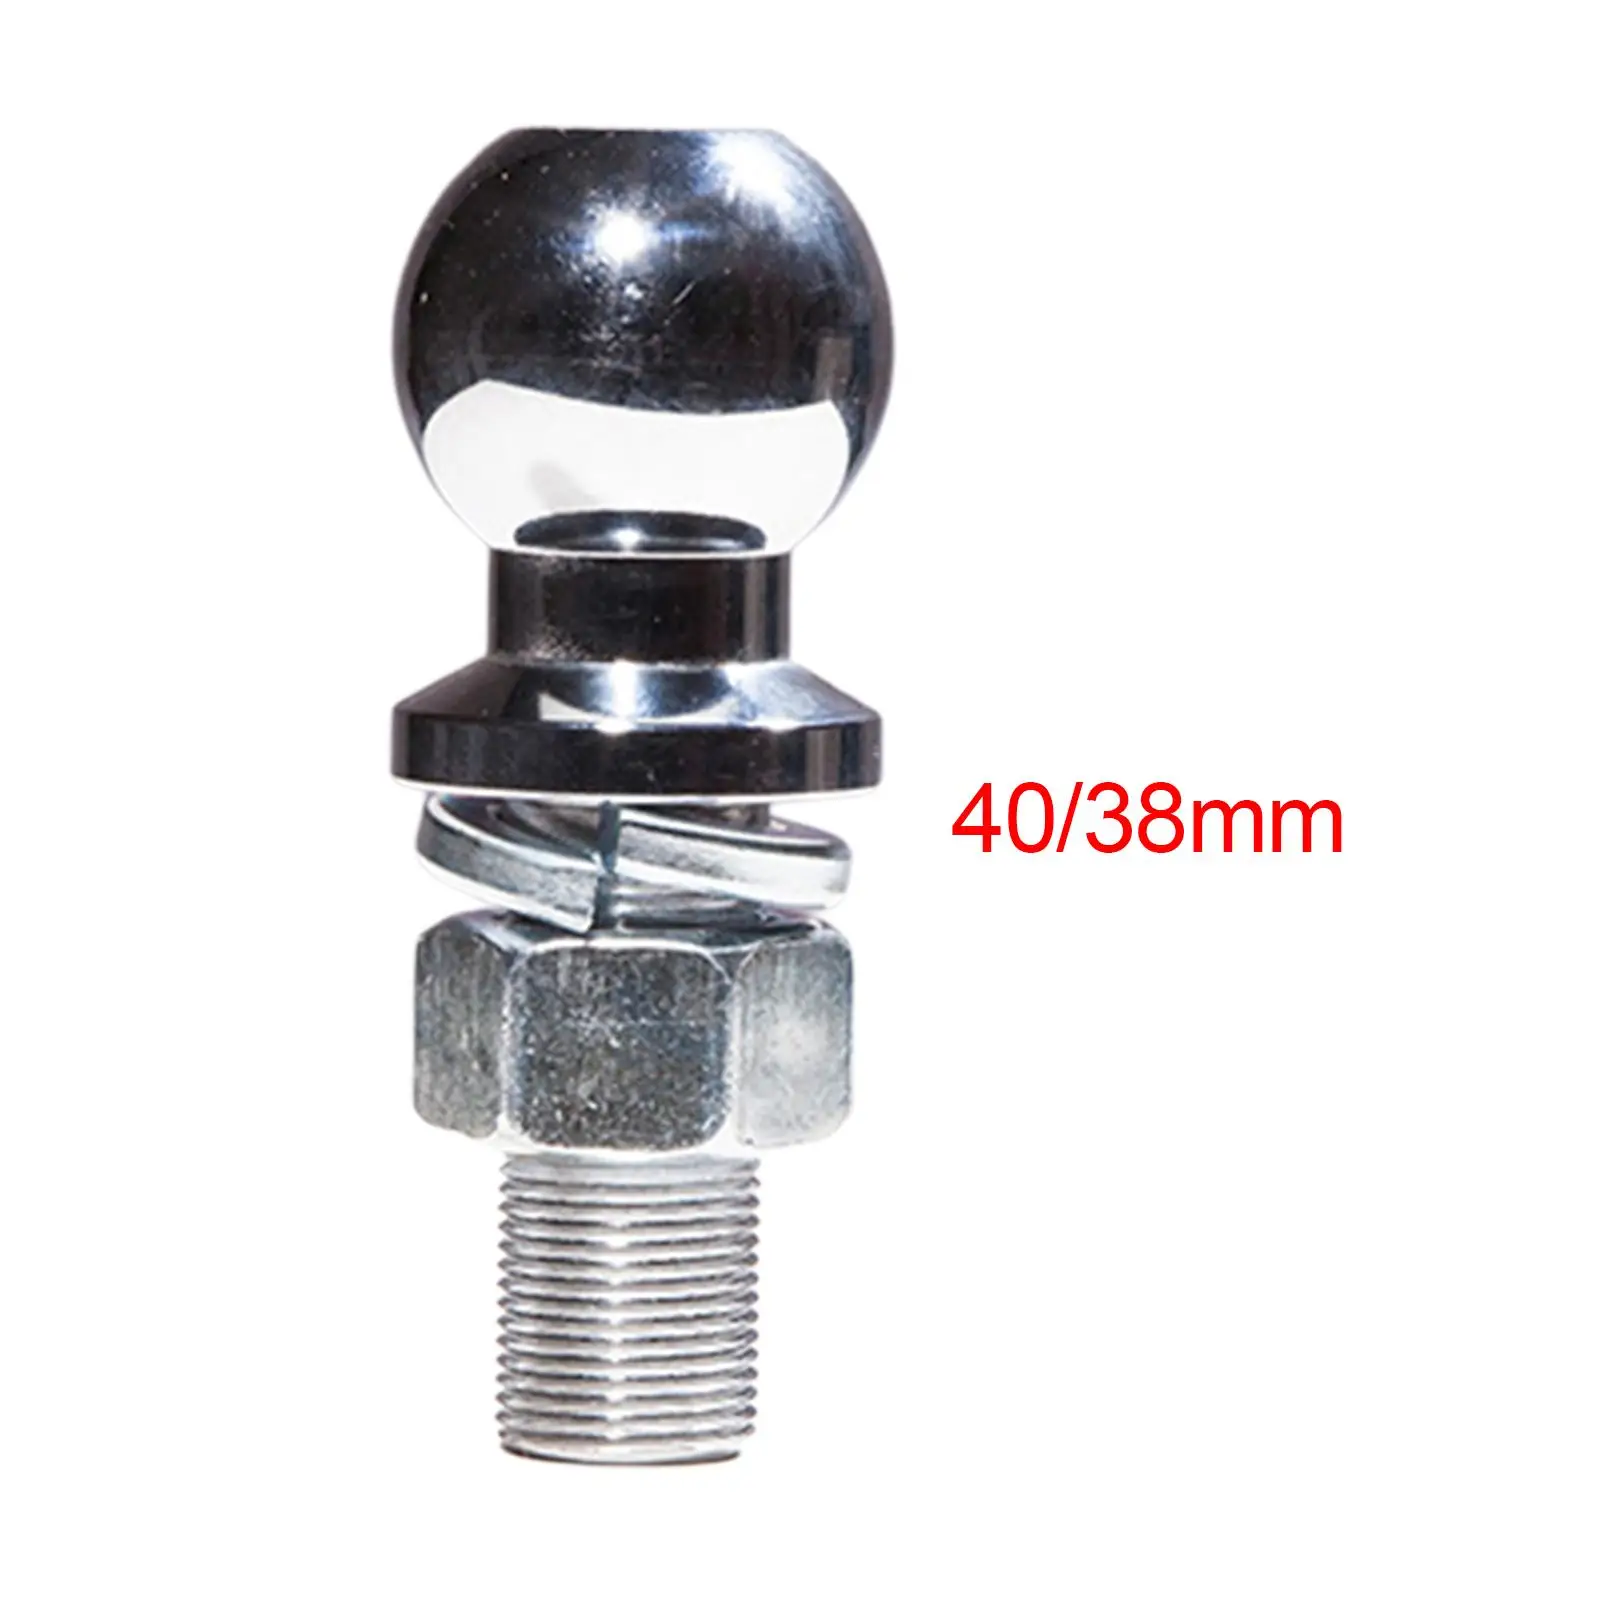 Trailer Hitch Ball 2 inch Portable Accessories Professional Durable Spare Parts Chrome Tow Hook Ball Head for Yacht RV